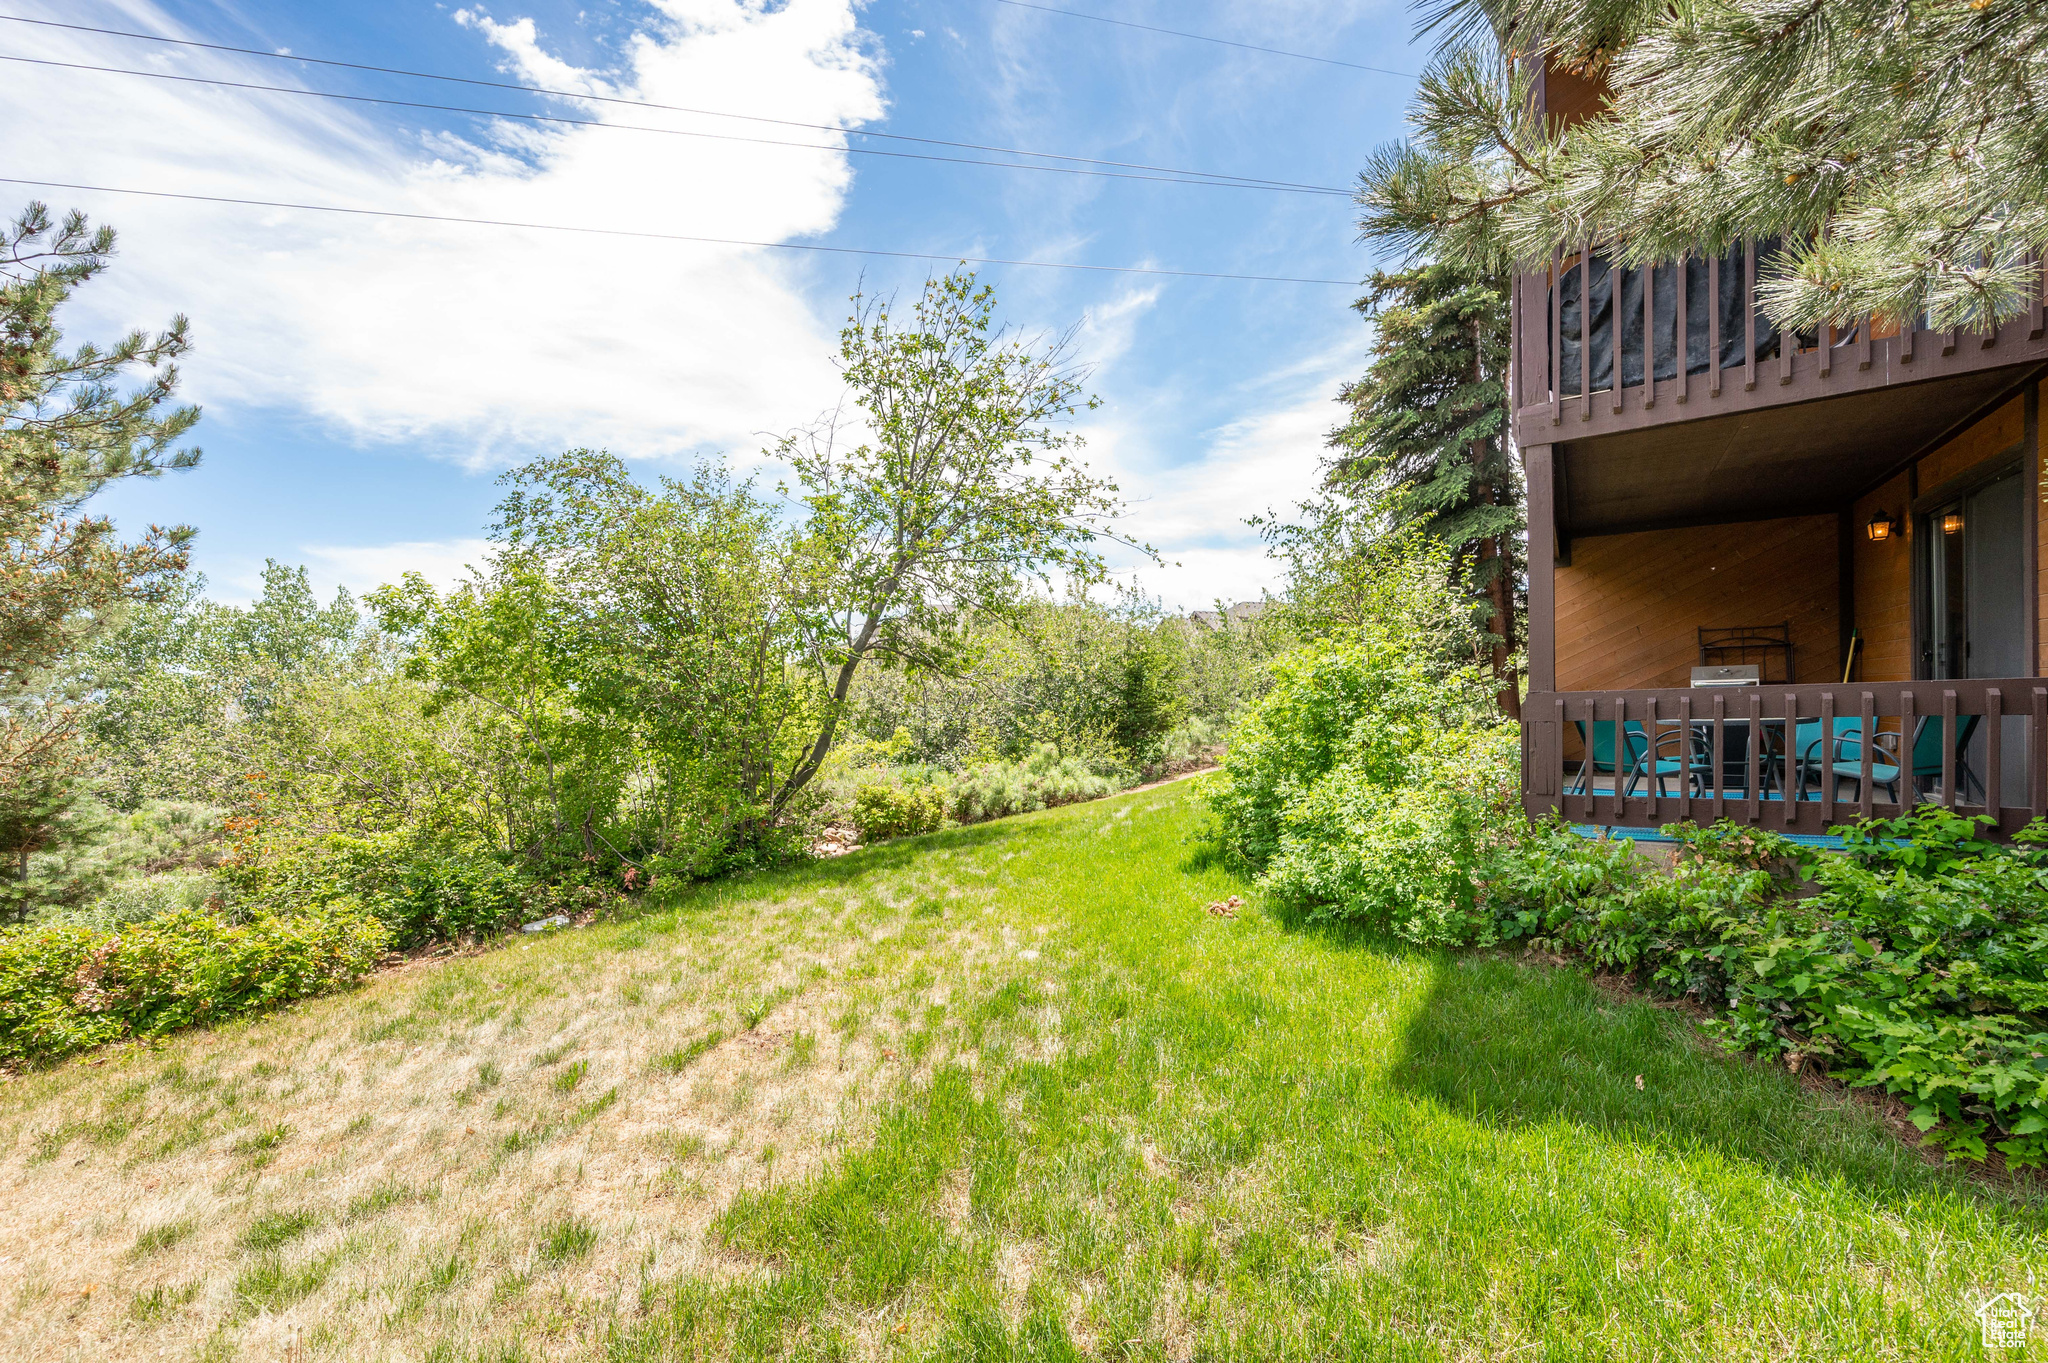 2025 CANYONS RESORT #V1, Park City, Utah 84098, 1 Bedroom Bedrooms, 5 Rooms Rooms,1 BathroomBathrooms,Residential,For sale,CANYONS RESORT,1990502